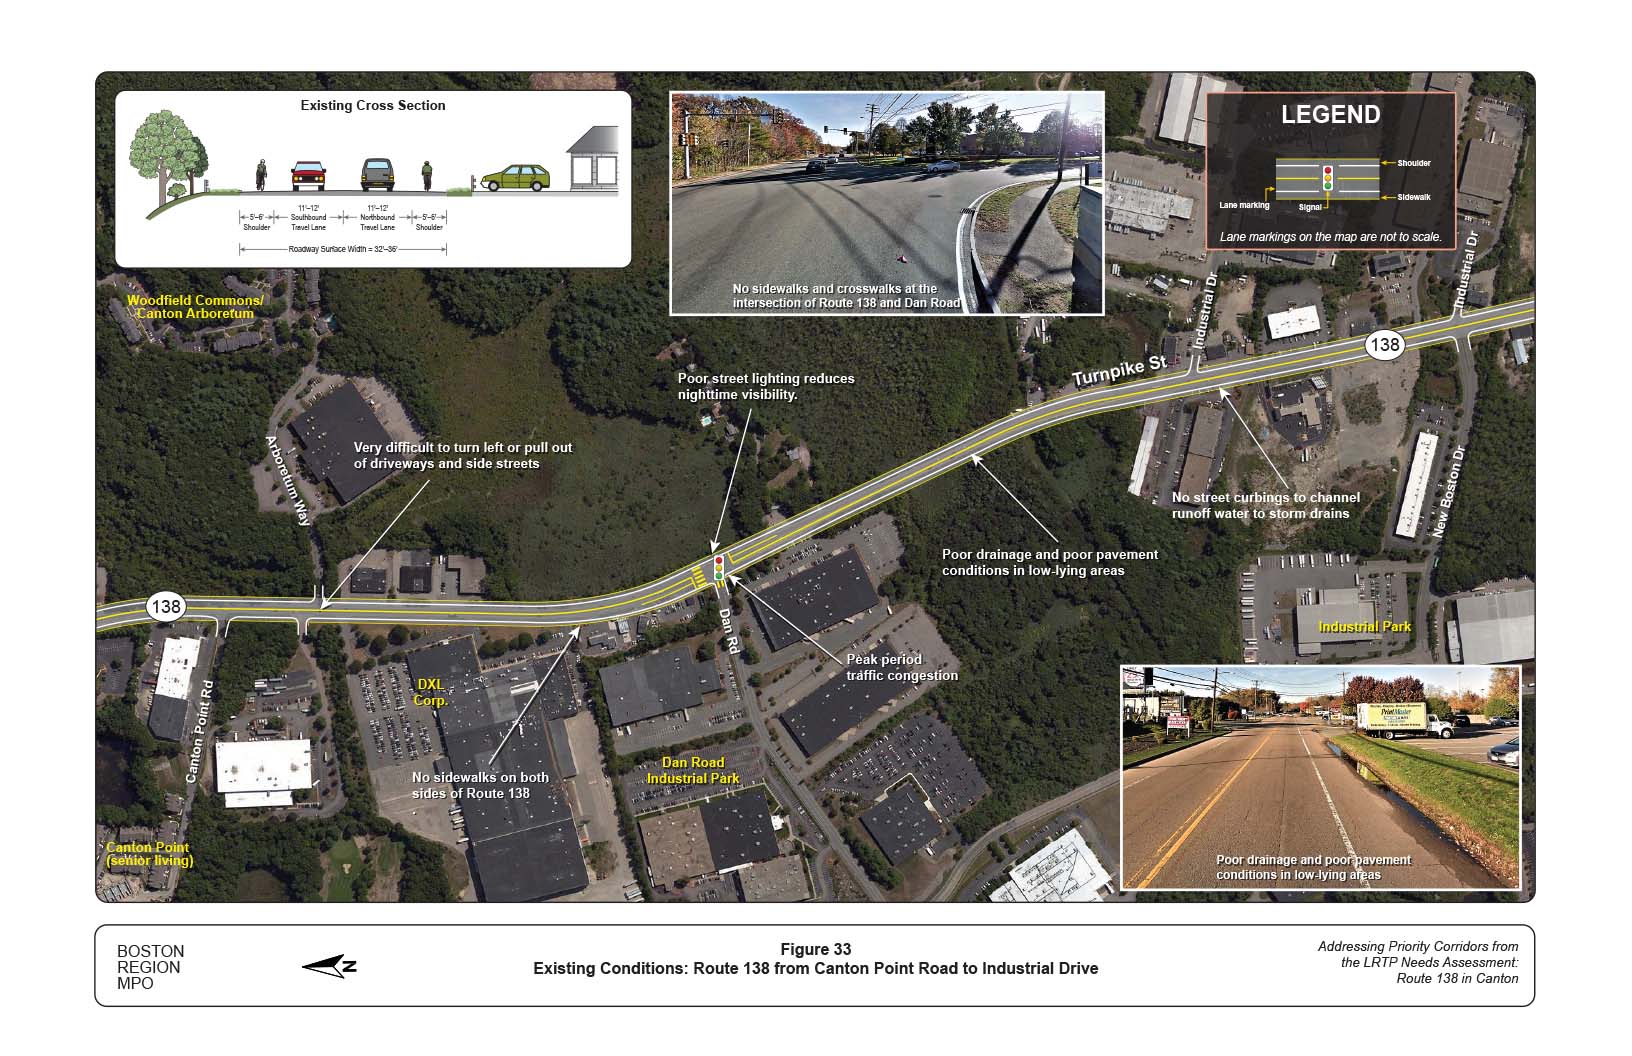 Figure 33 is map of Route 138 from Canton Point Road to Industrial Drive with overlays showing the locations of existing problems on the roadway and a graphic of the current cross section of the roadway.